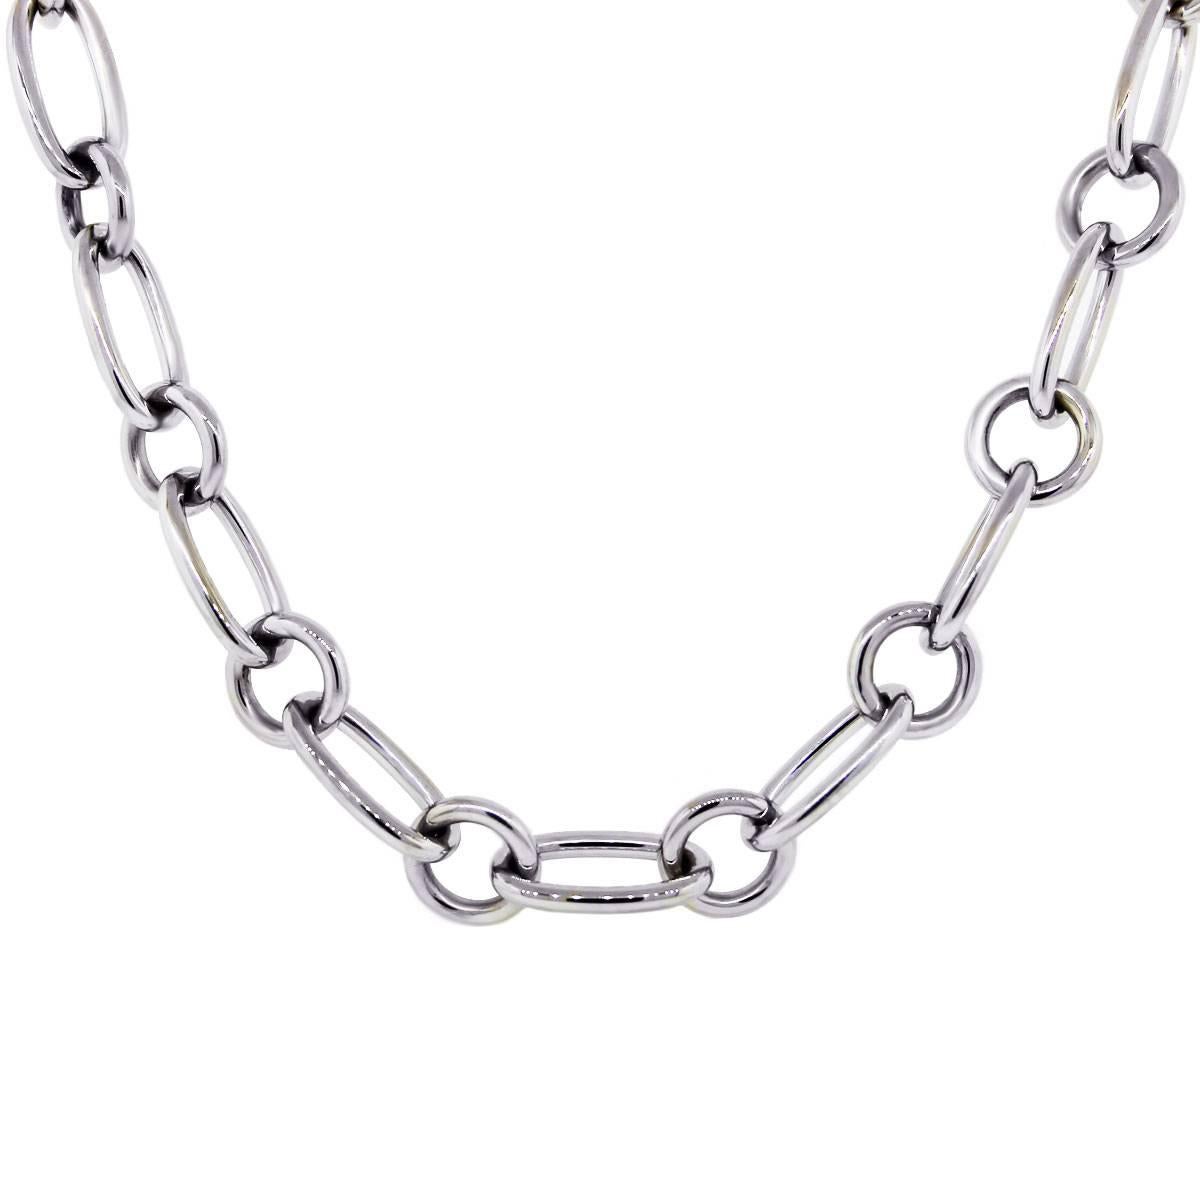 Tiffany & Co. Gold Chain Link Necklace